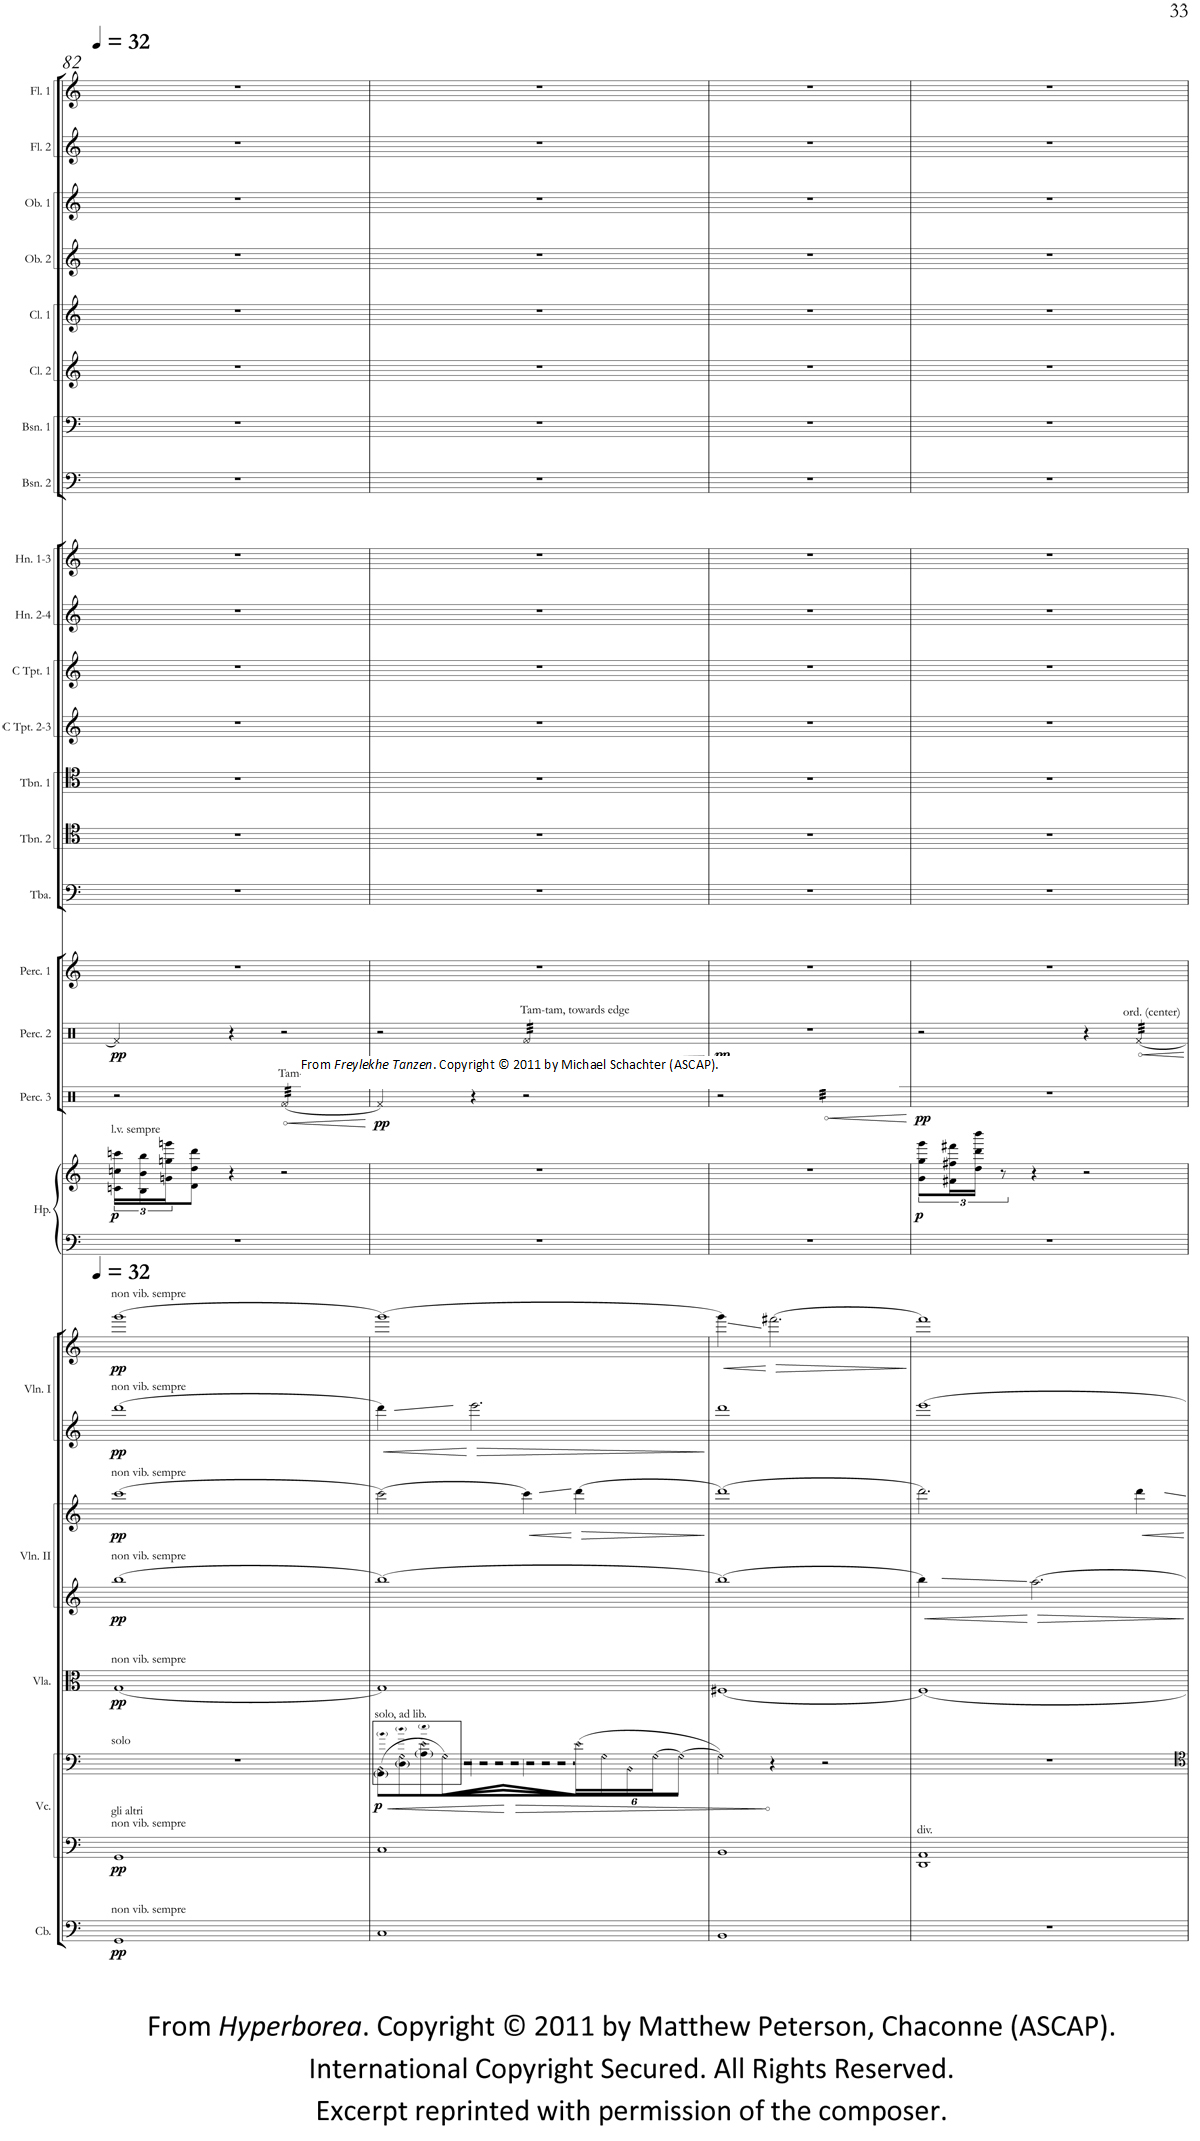 A page from the orchestral score of Matthew Peterson's Hyperborea